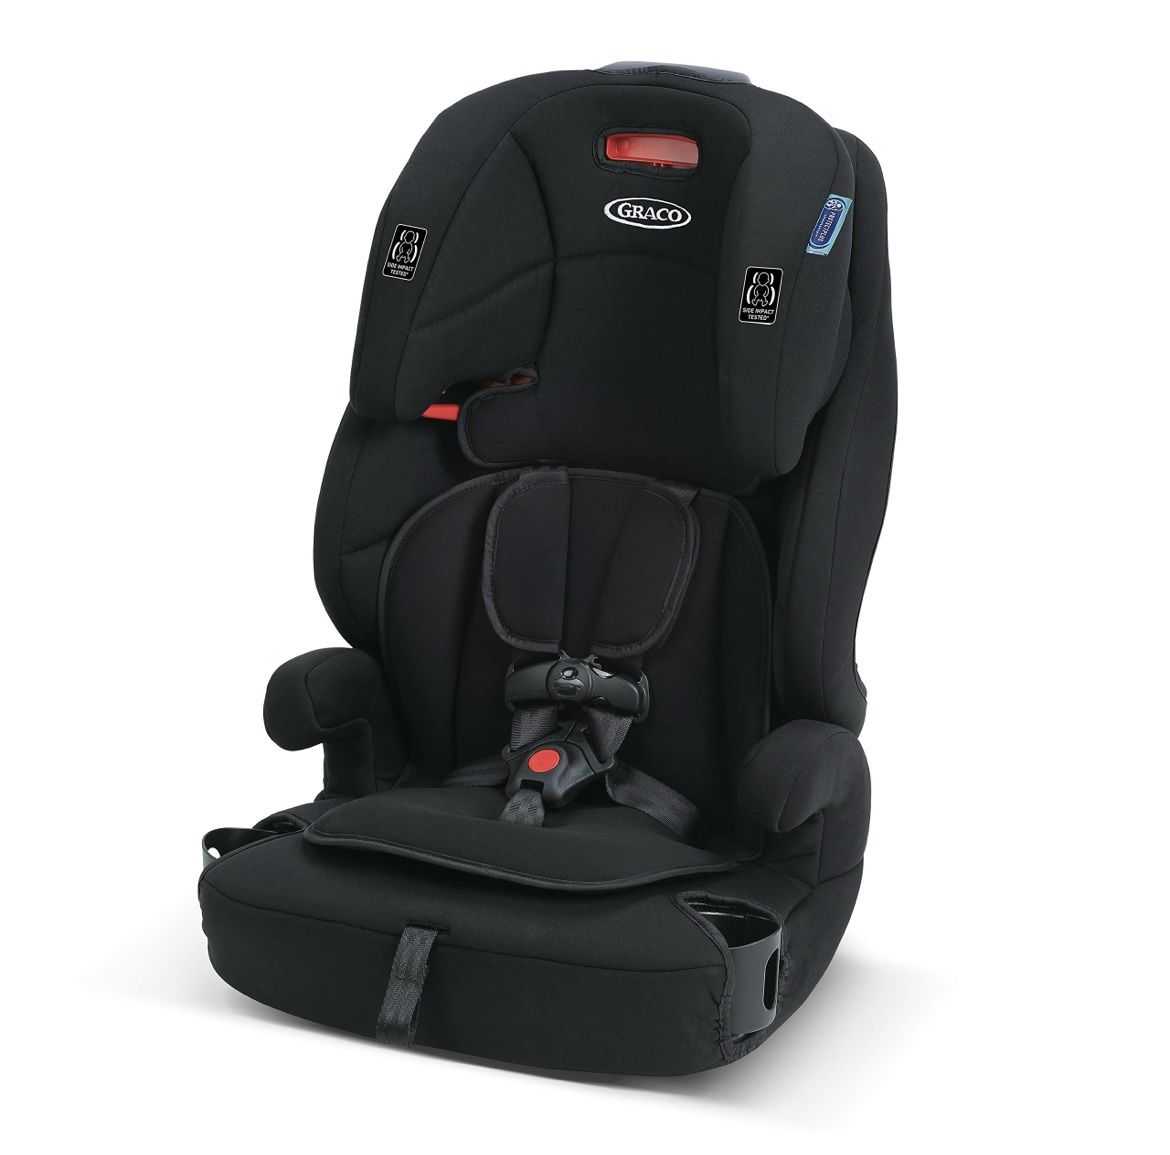 Graco Tranzitions 3 in1 Booster Seat